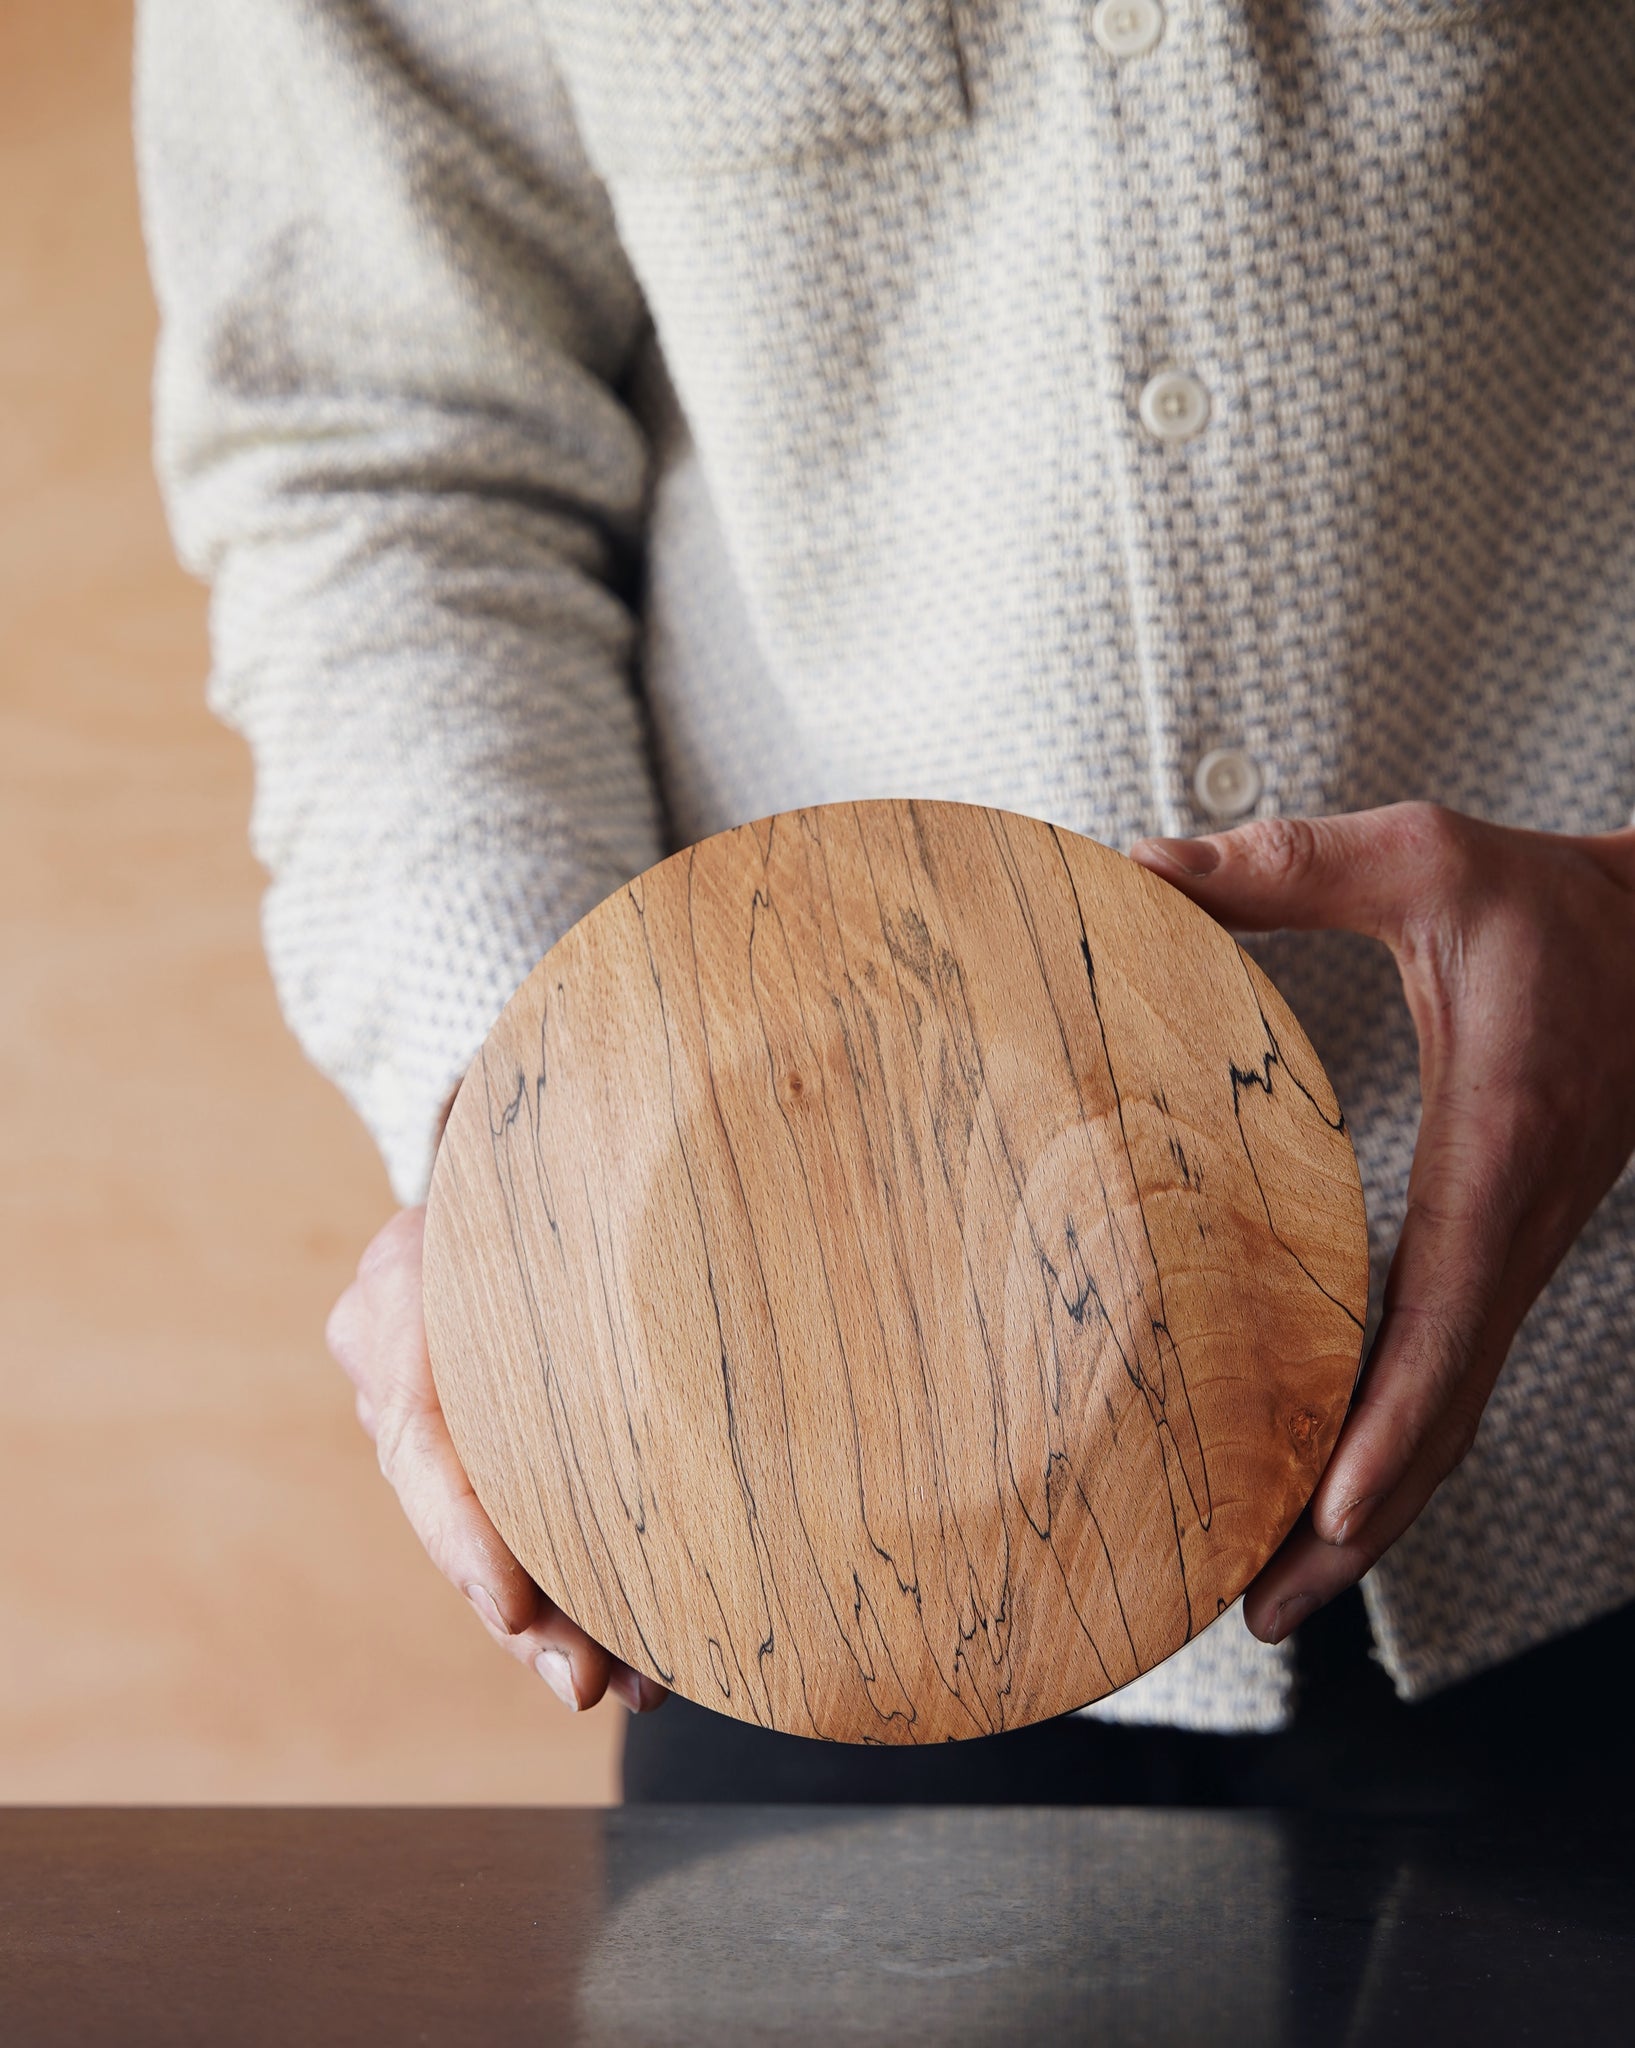 Low Bowl - in Spalted Beech